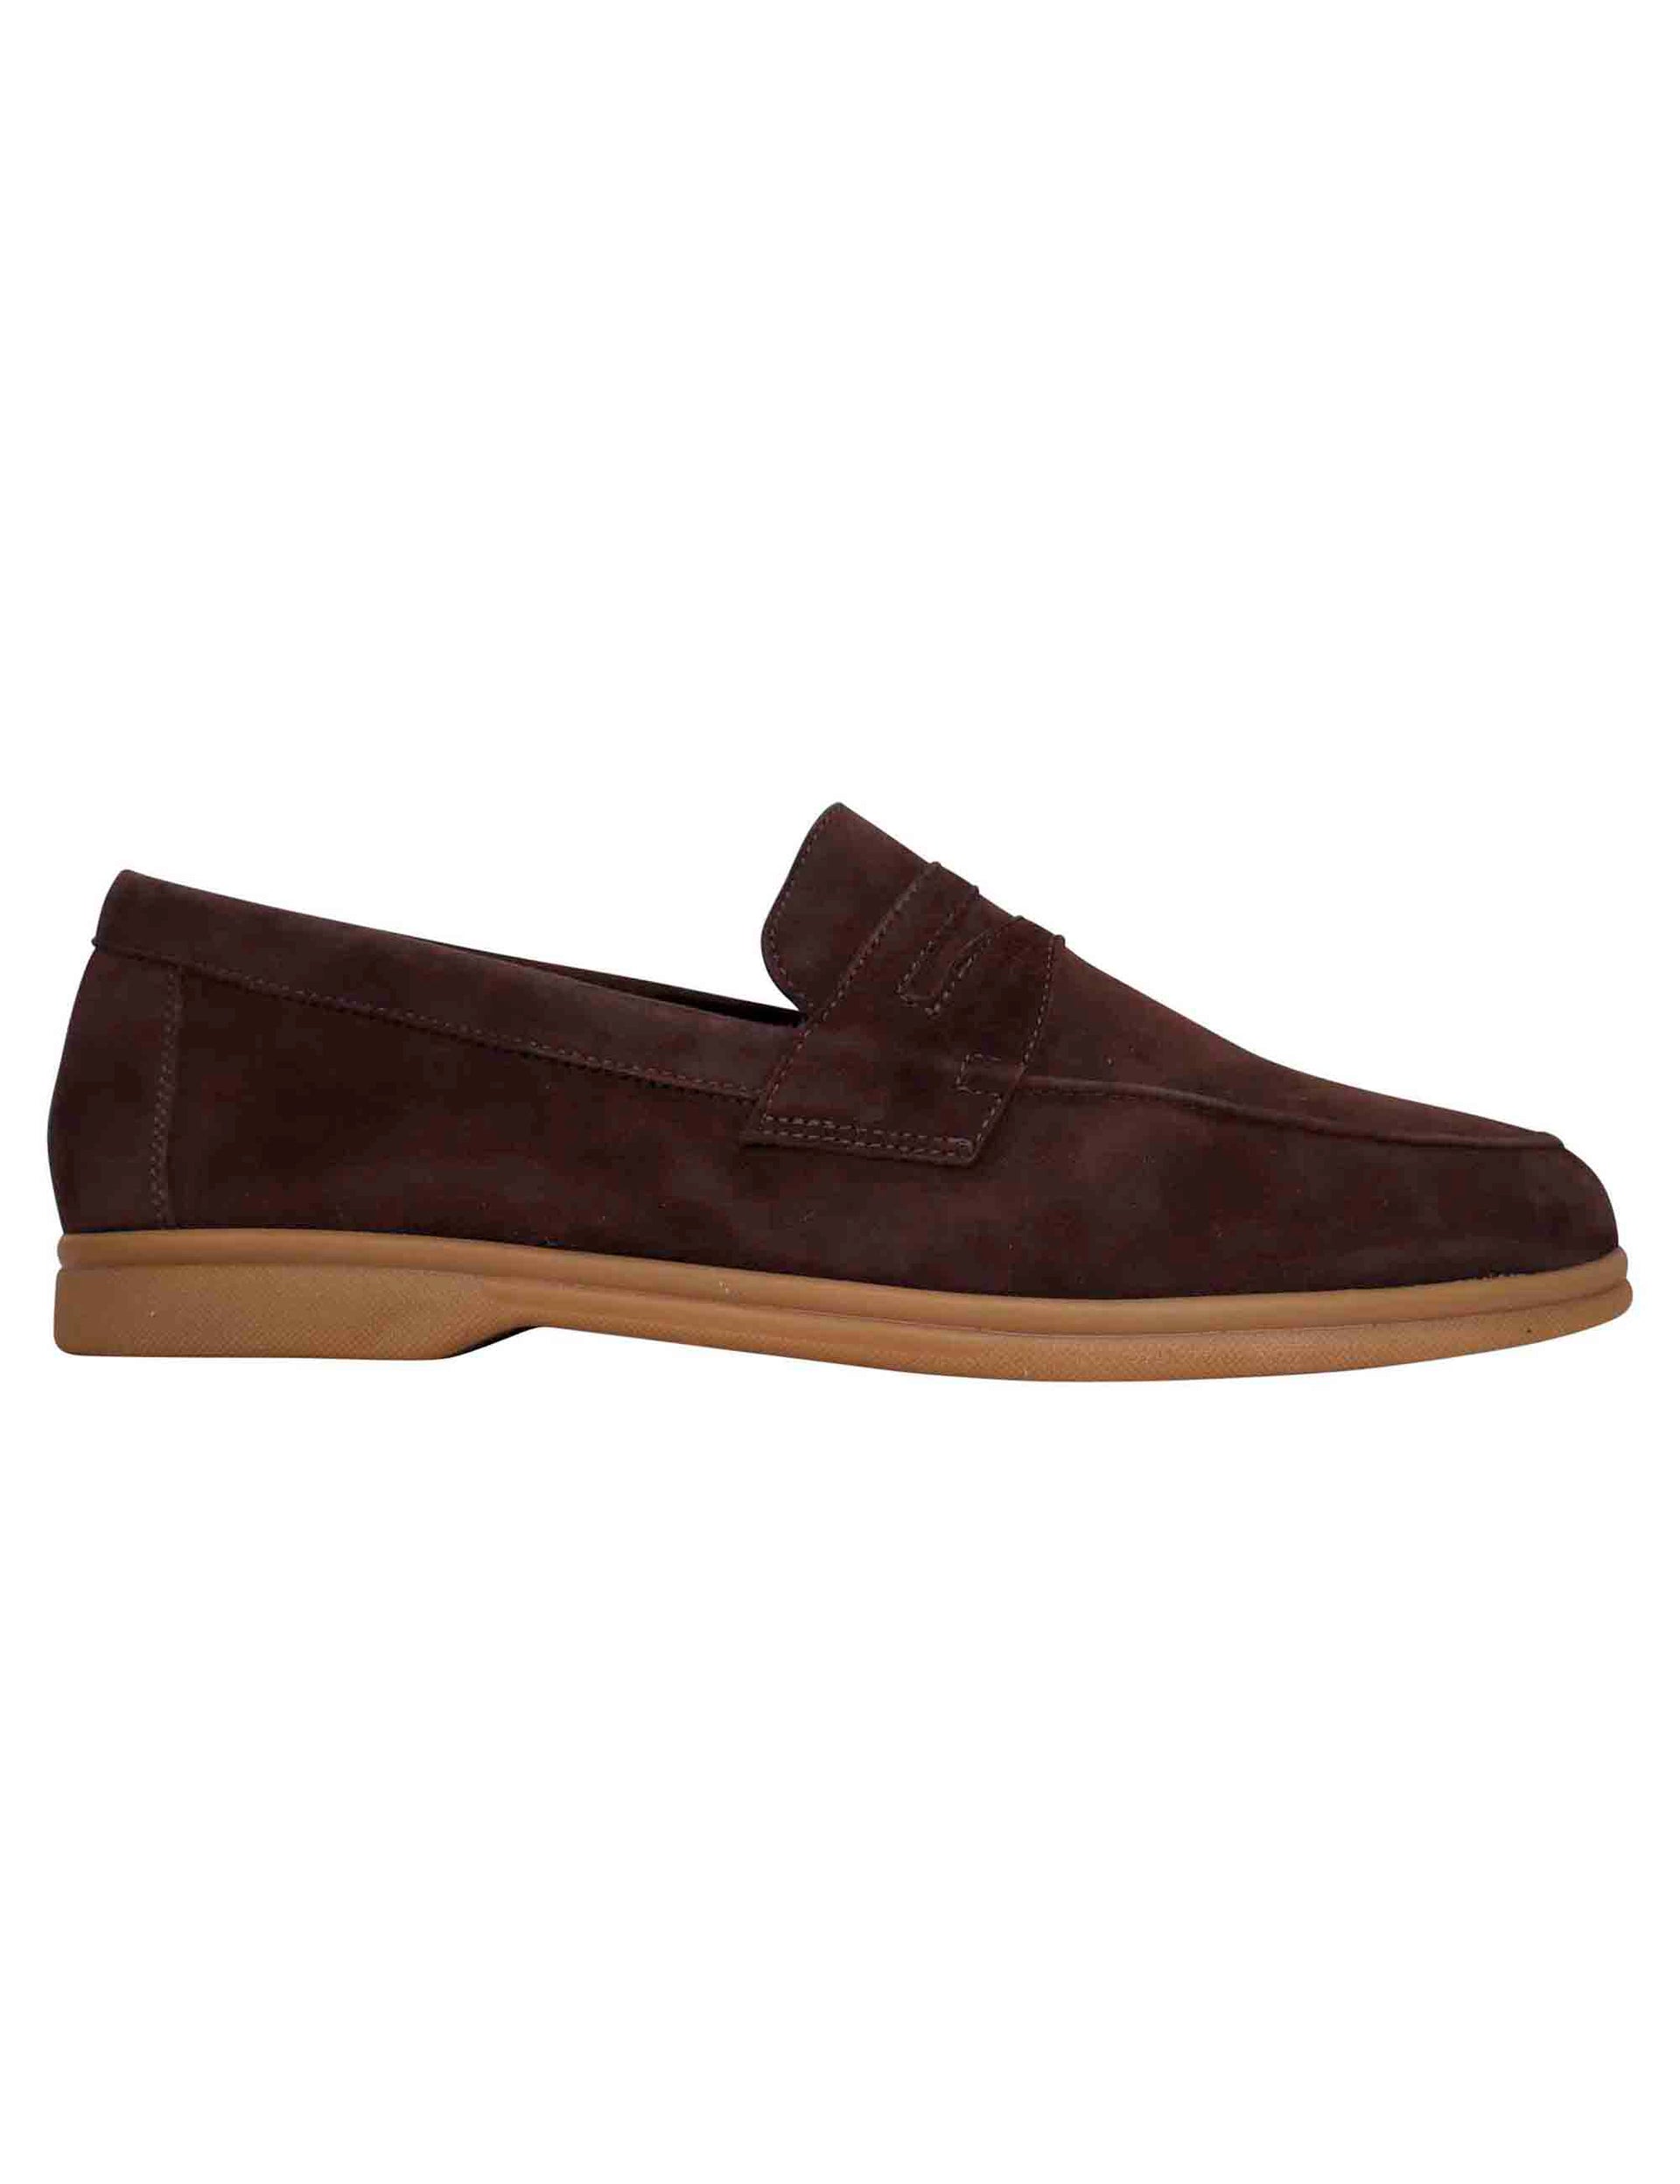 Men's moccasins in dark brown suede with light rubber sole